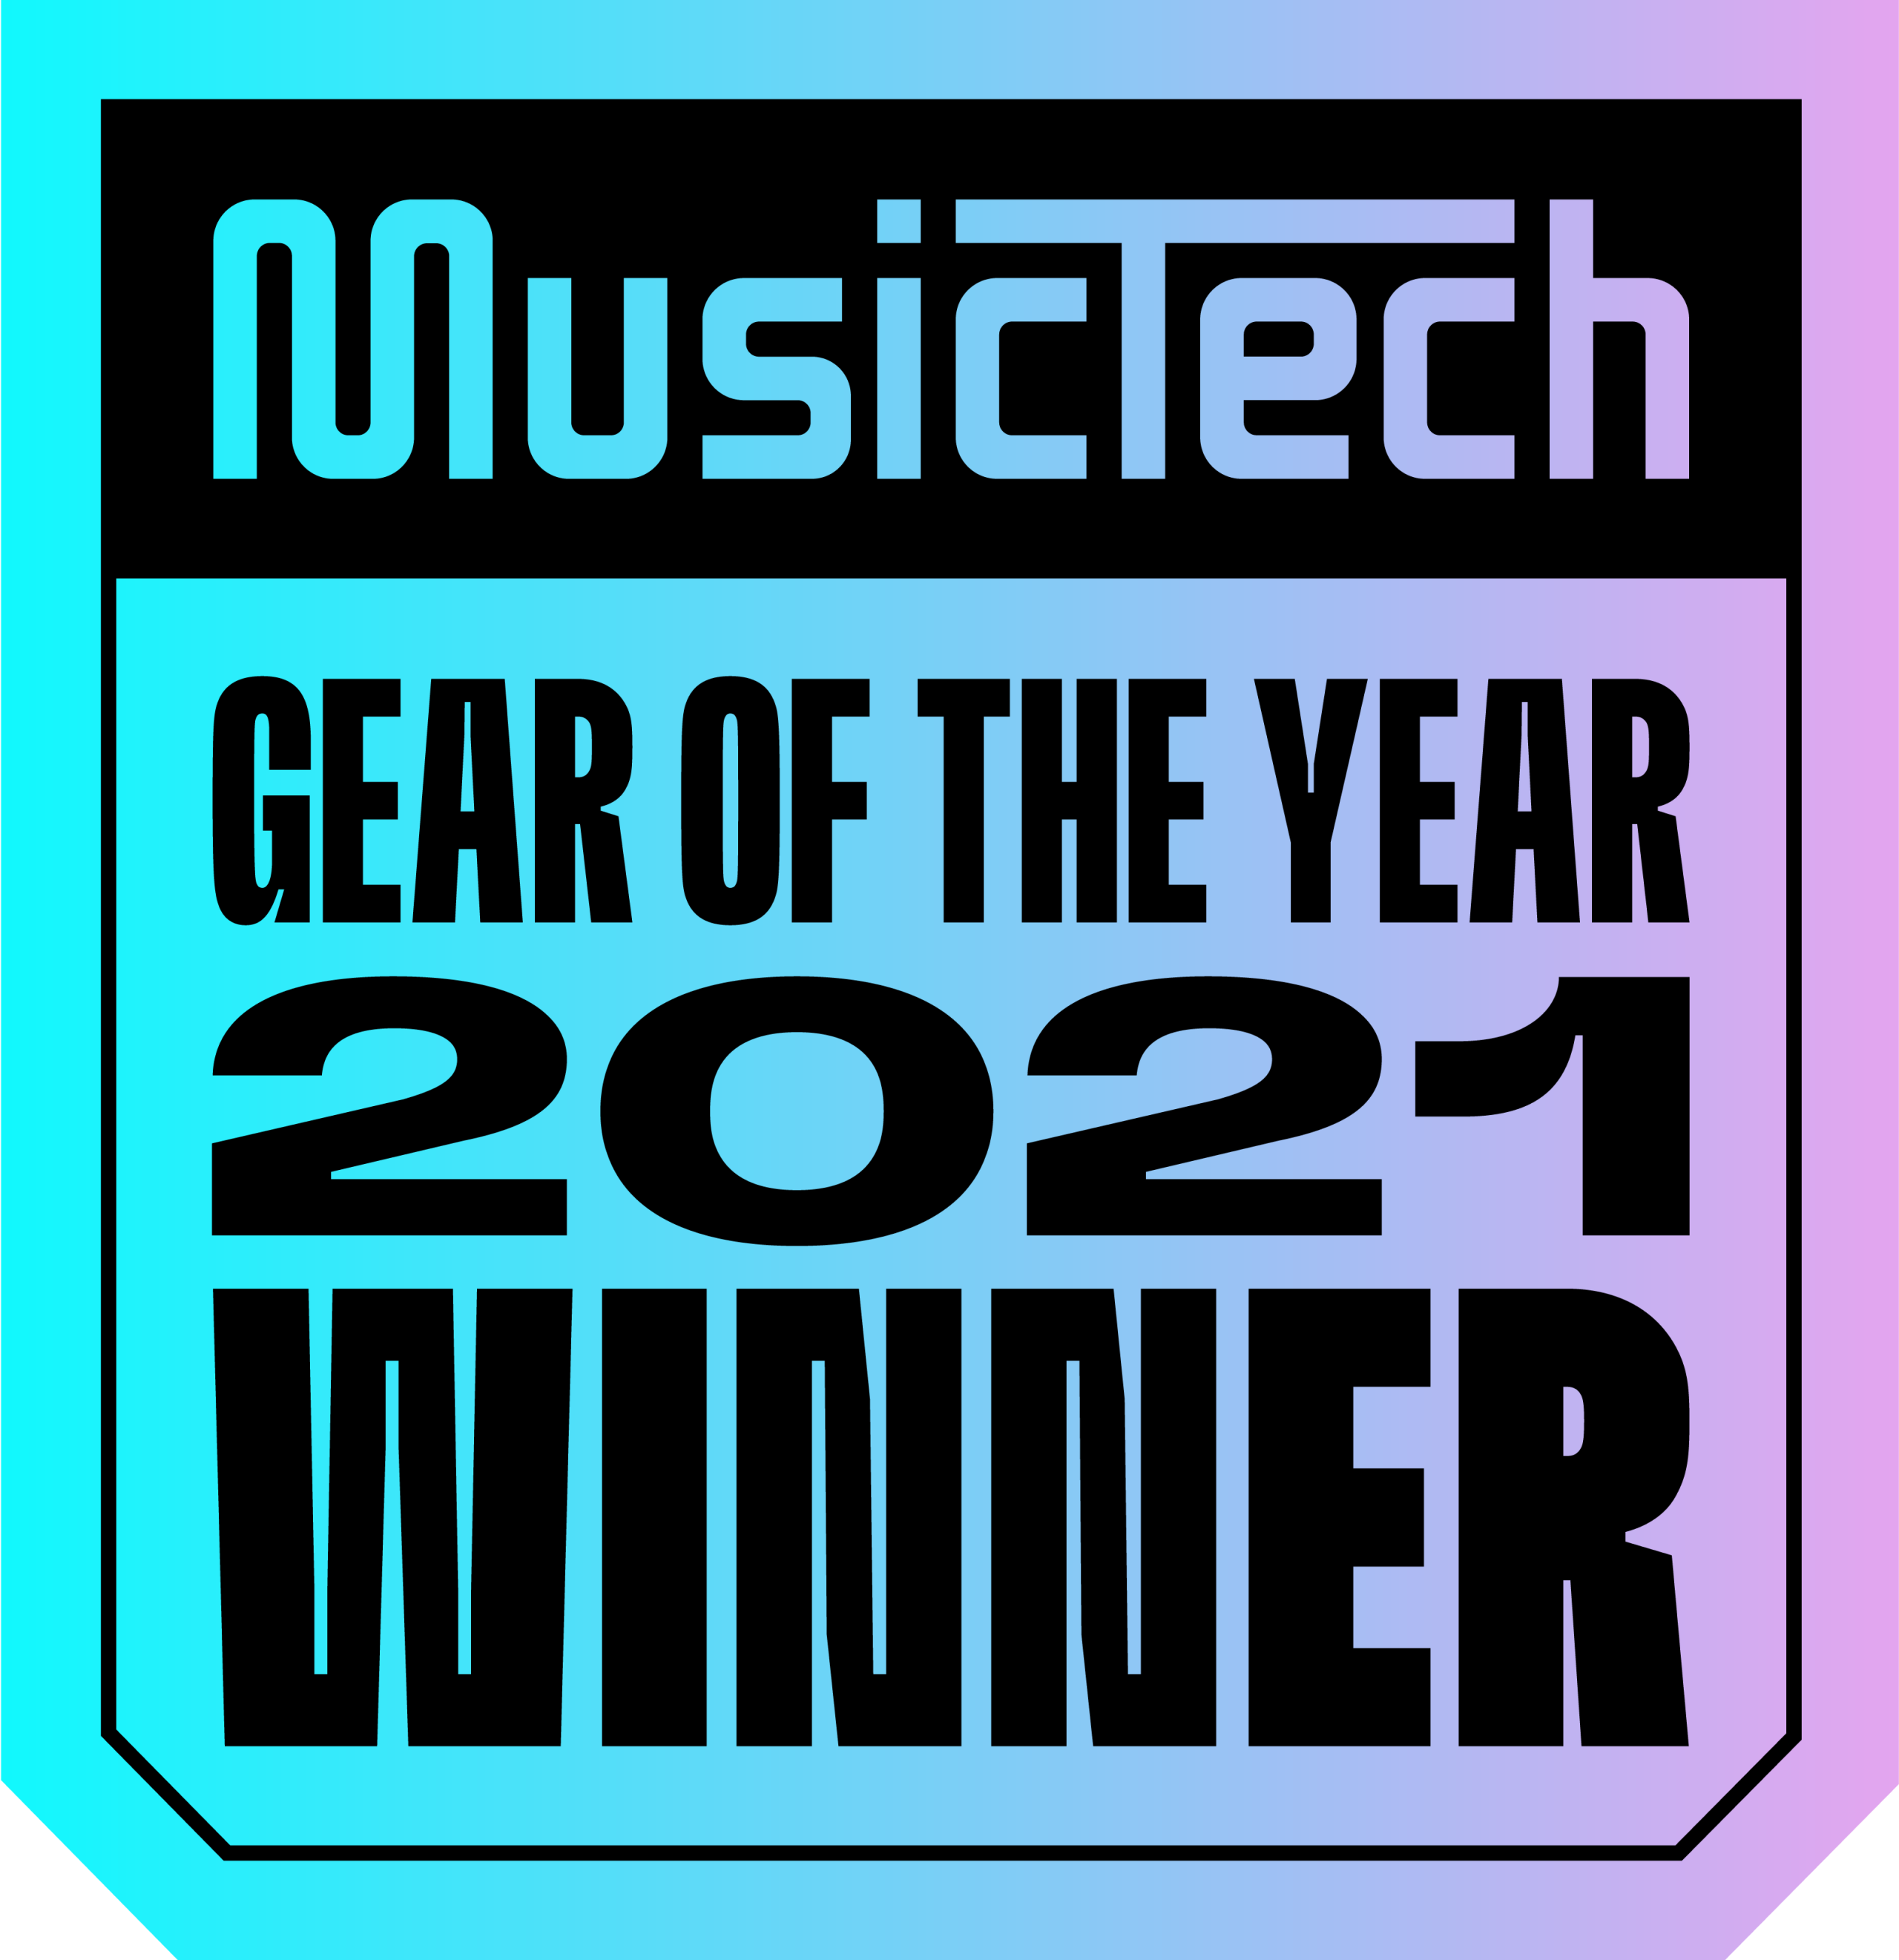 Music Tech Gear of the Year